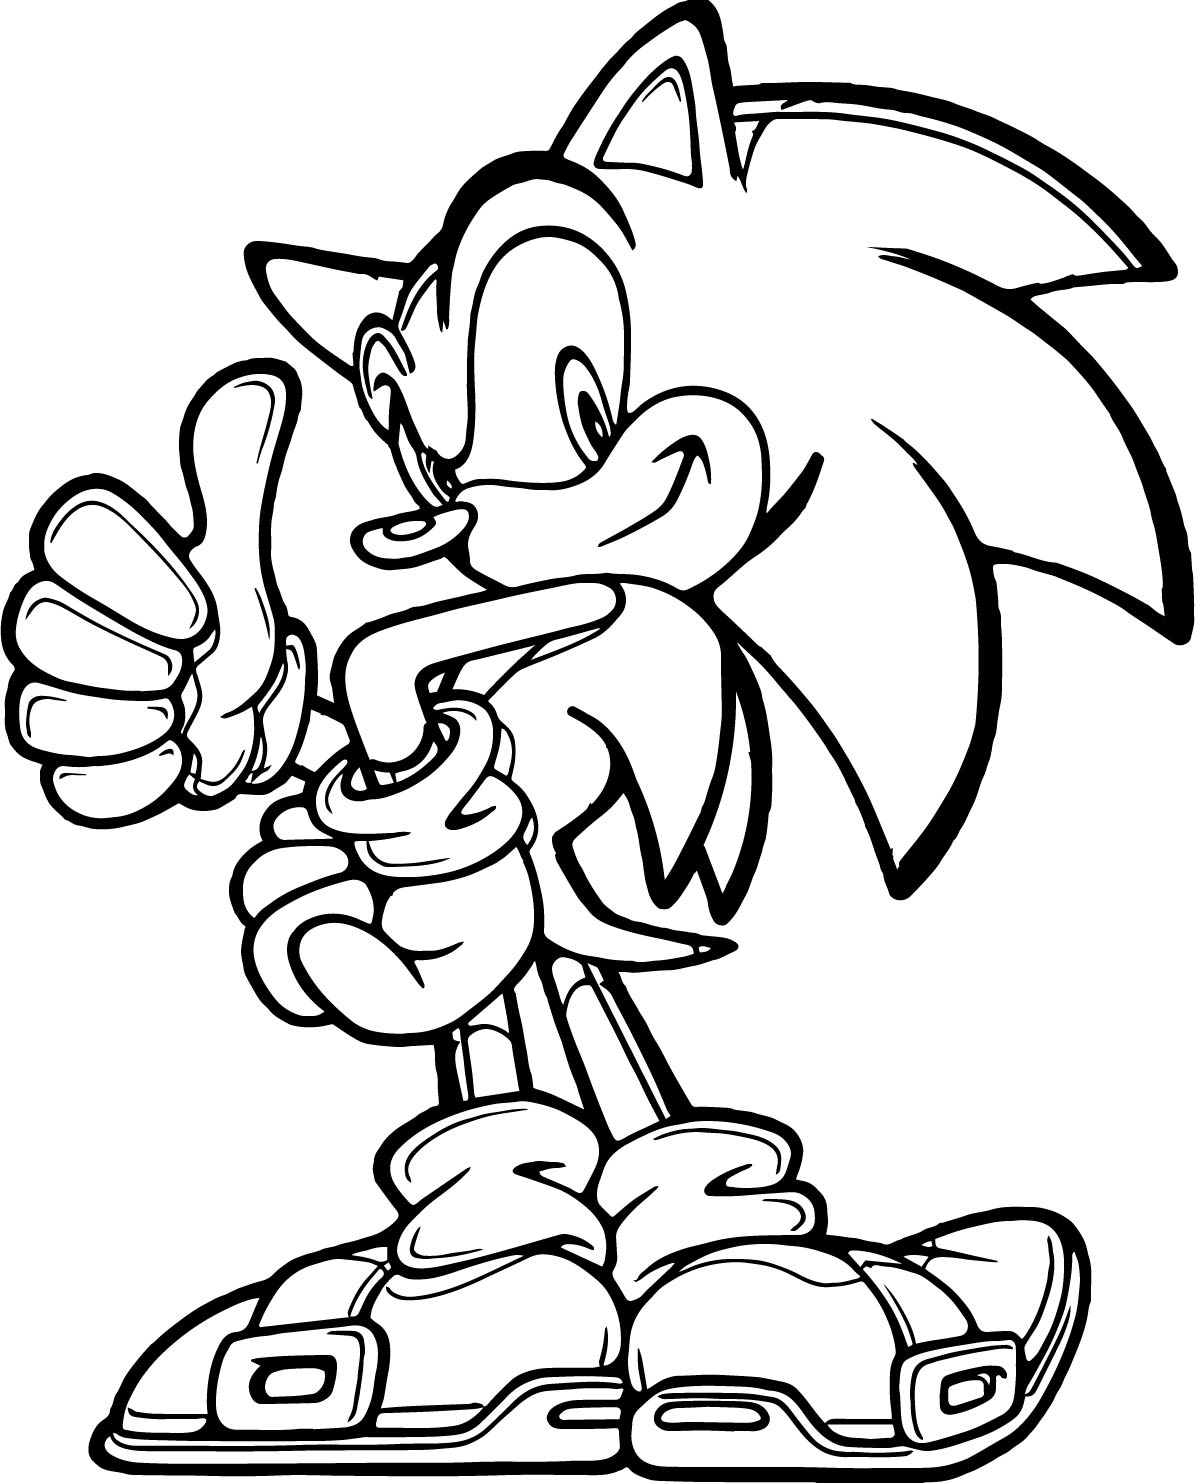 822 Simple Sonic Boom Coloring Pages with Animal character